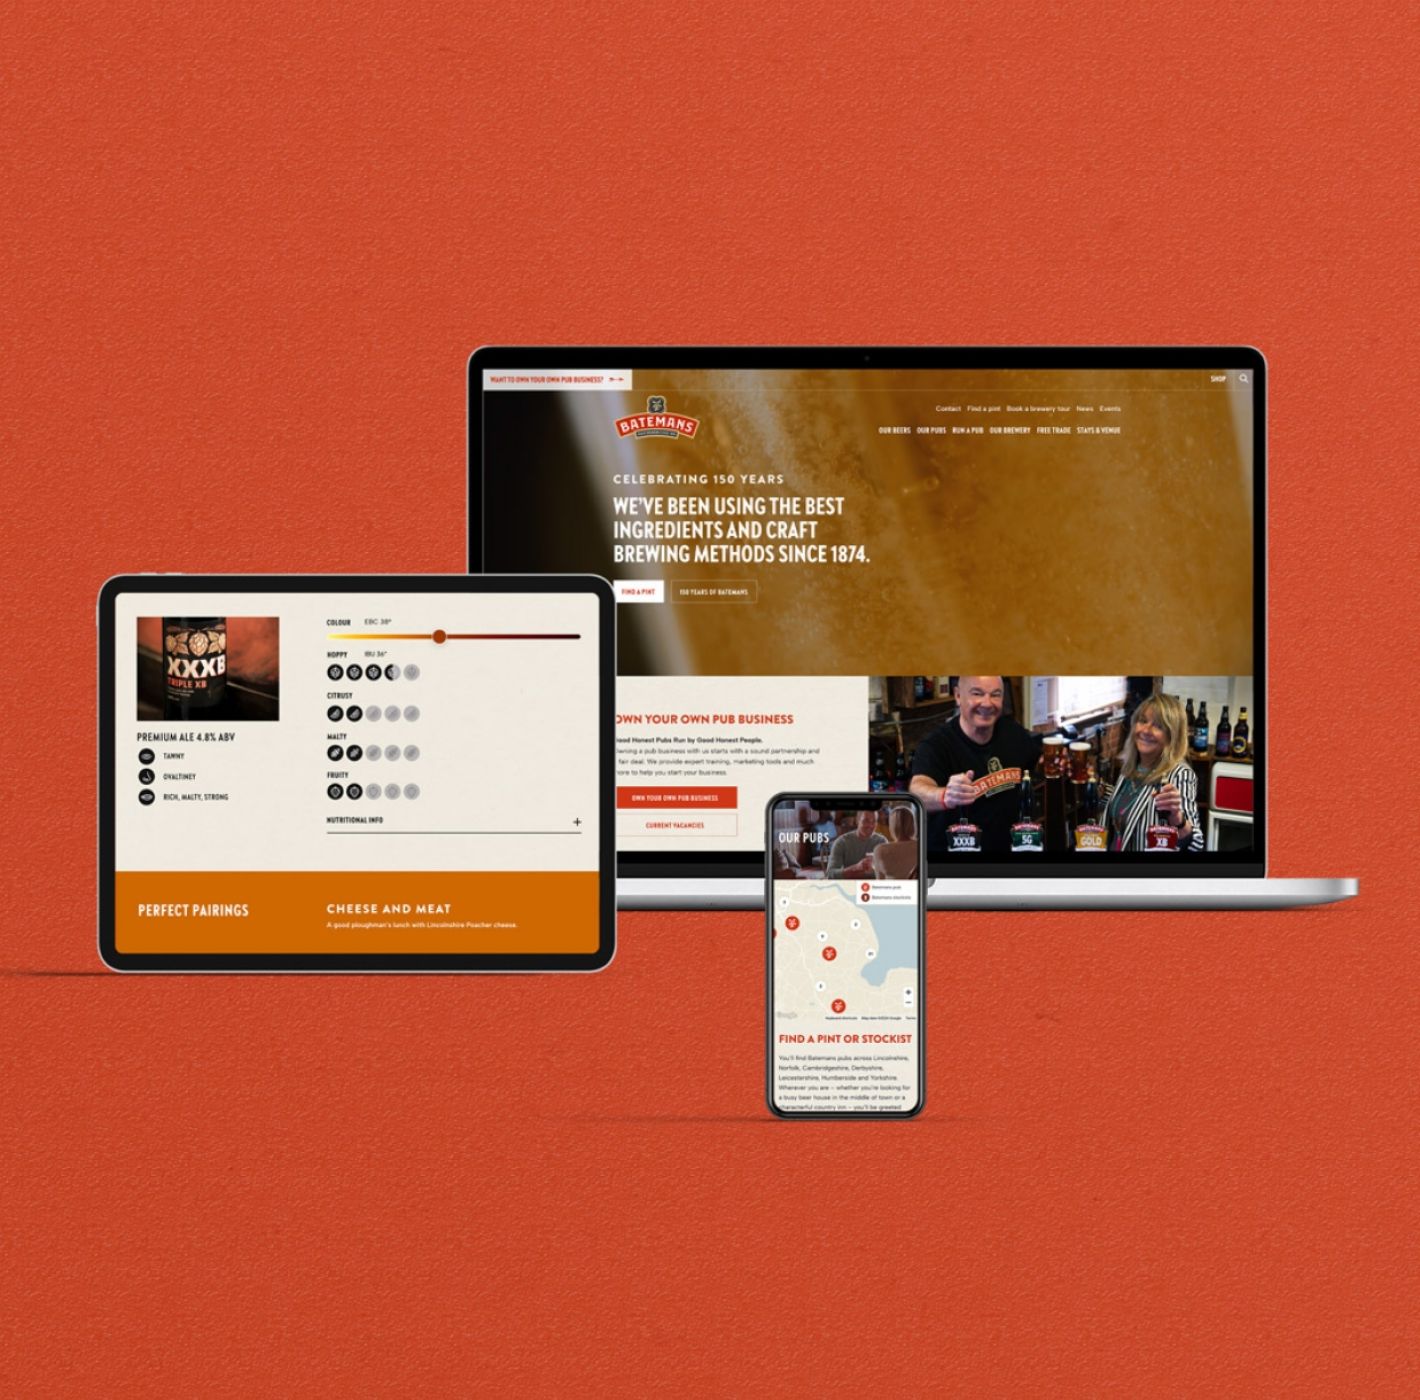 Banner image of Batemans Brewery website being shown across Tablet, Desktop and Mobile devices on an orange background